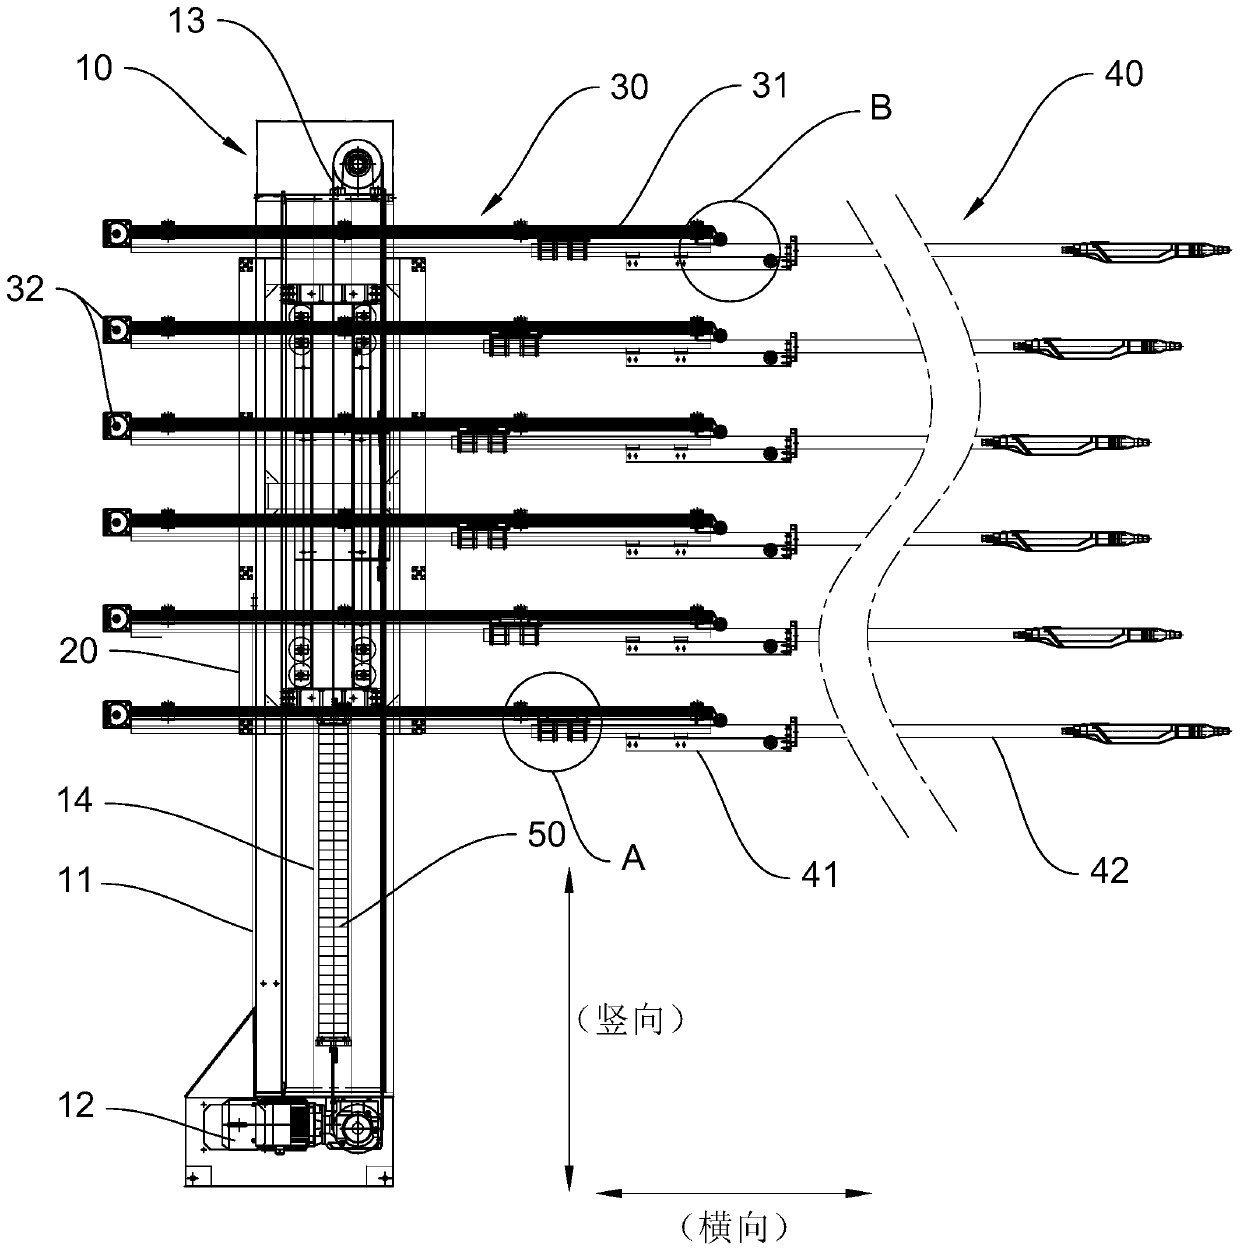 Self-adaptation system for contour of workpiece